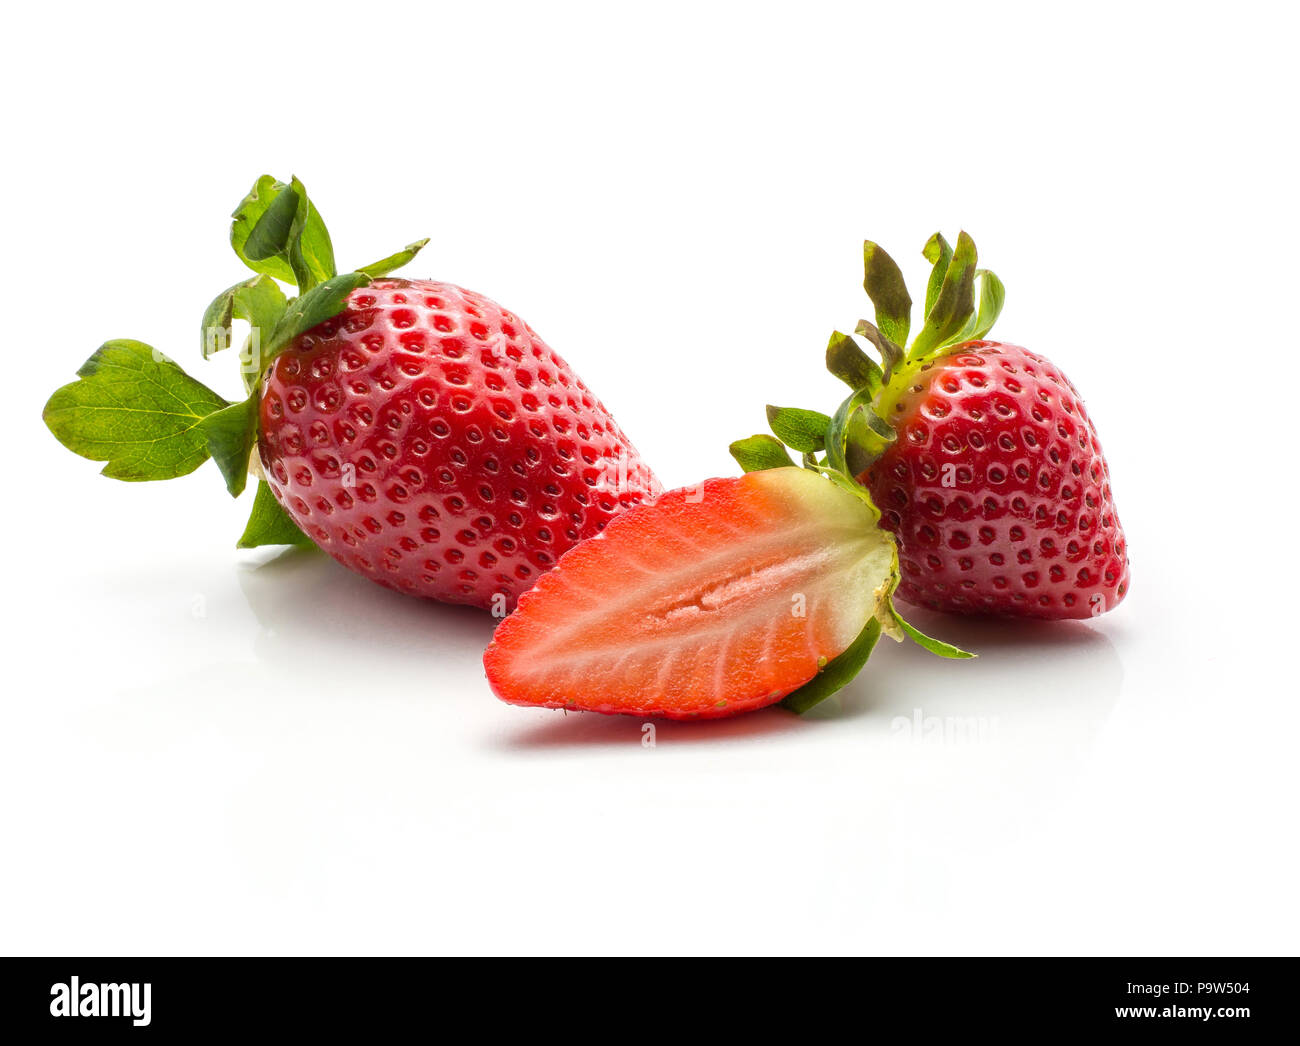 Two garden strawberries and one fresh cut half isolated on white background Stock Photo